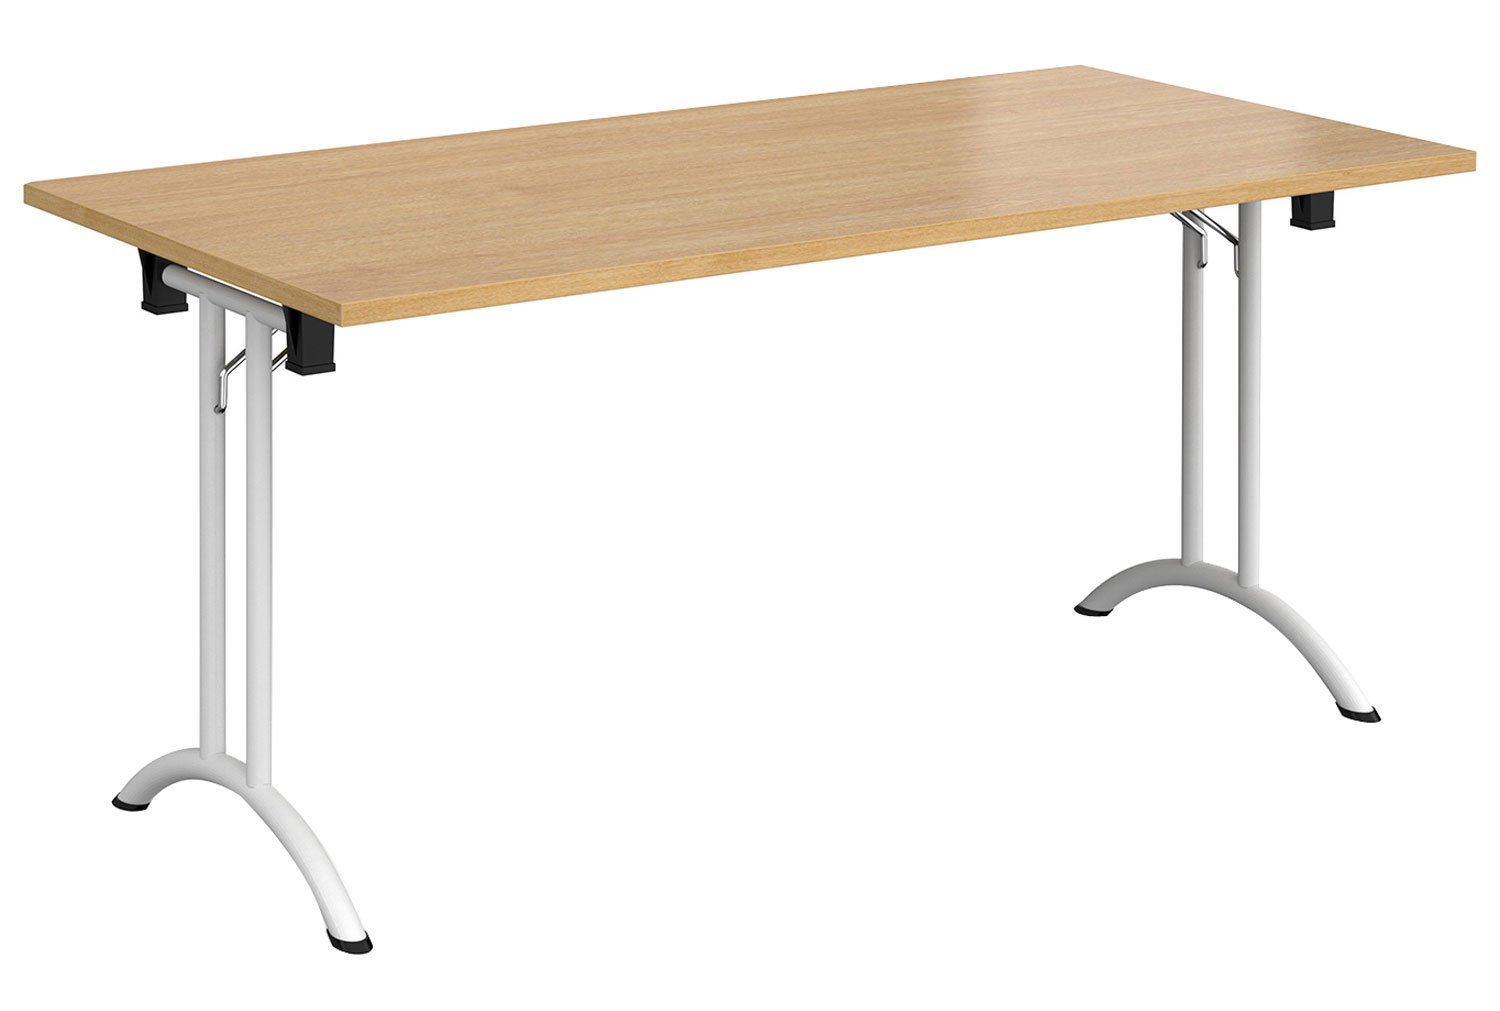 All Oak Rectangular Folding Table With Curved Feet, 160wx80dx73h (cm)